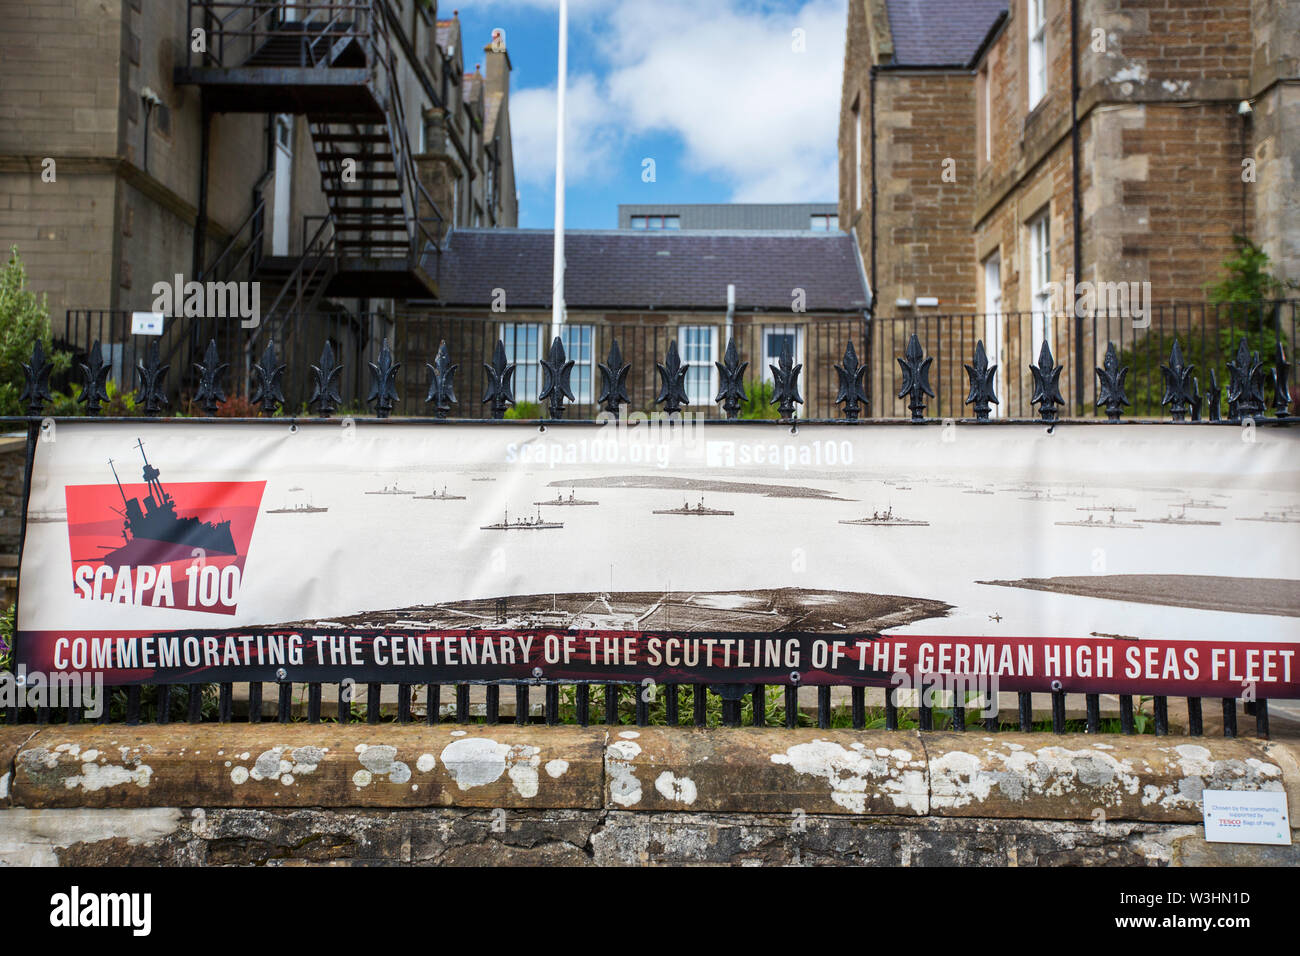 A banner commemrating the centenary of the scuttling of the German fleet in Scapa Flow, Orkney, Scotland, UK. Stock Photo